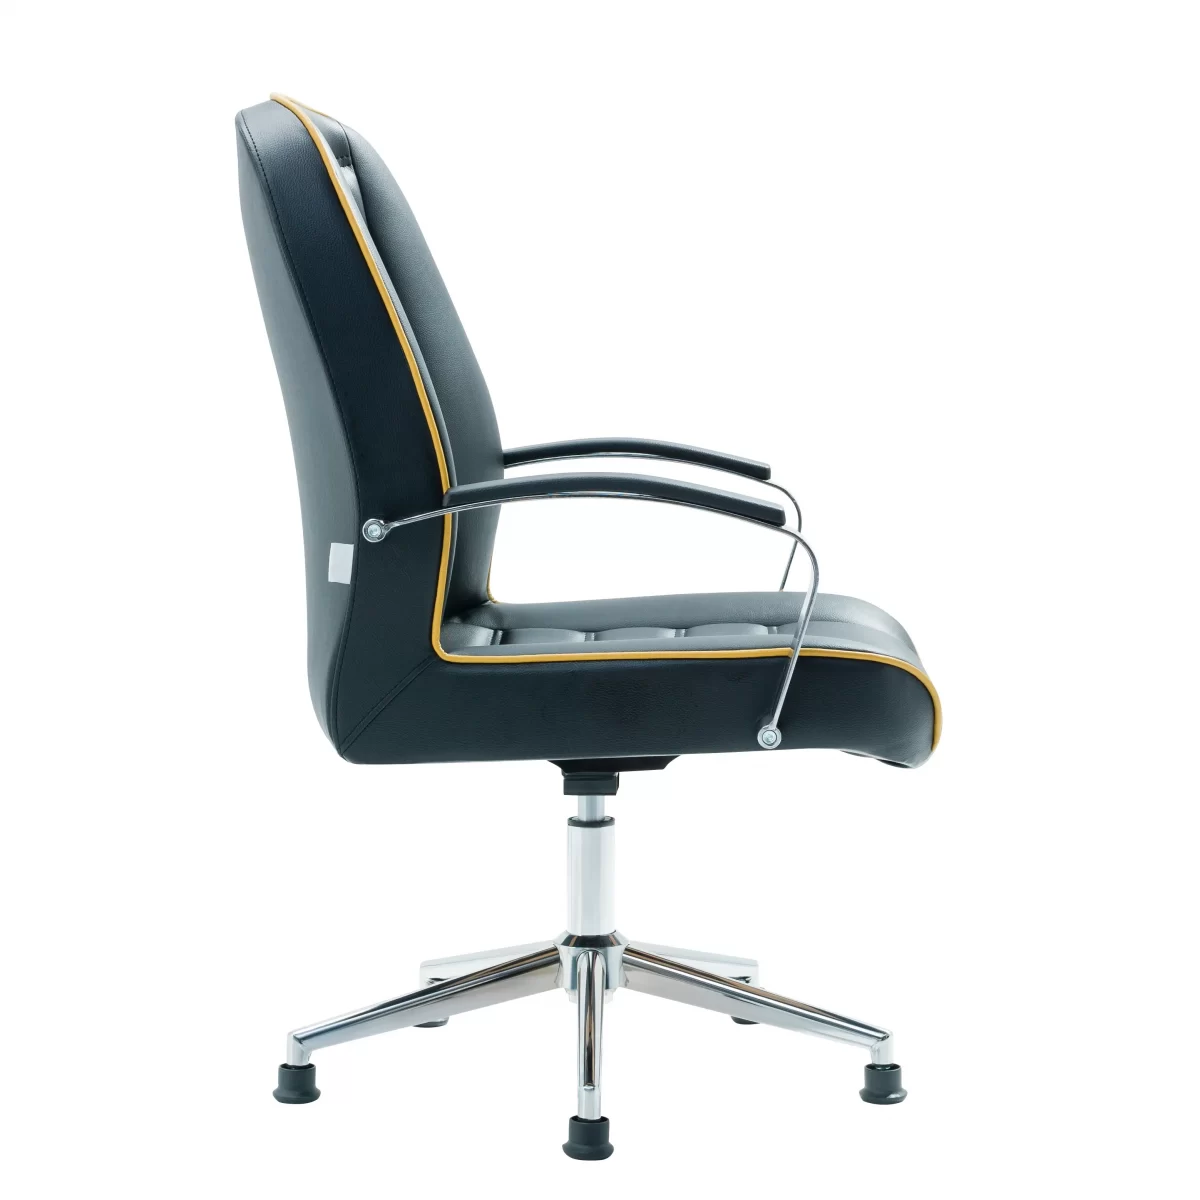 Karina Office Guest Chair Modern Office Chairs Turkey 3 scaled